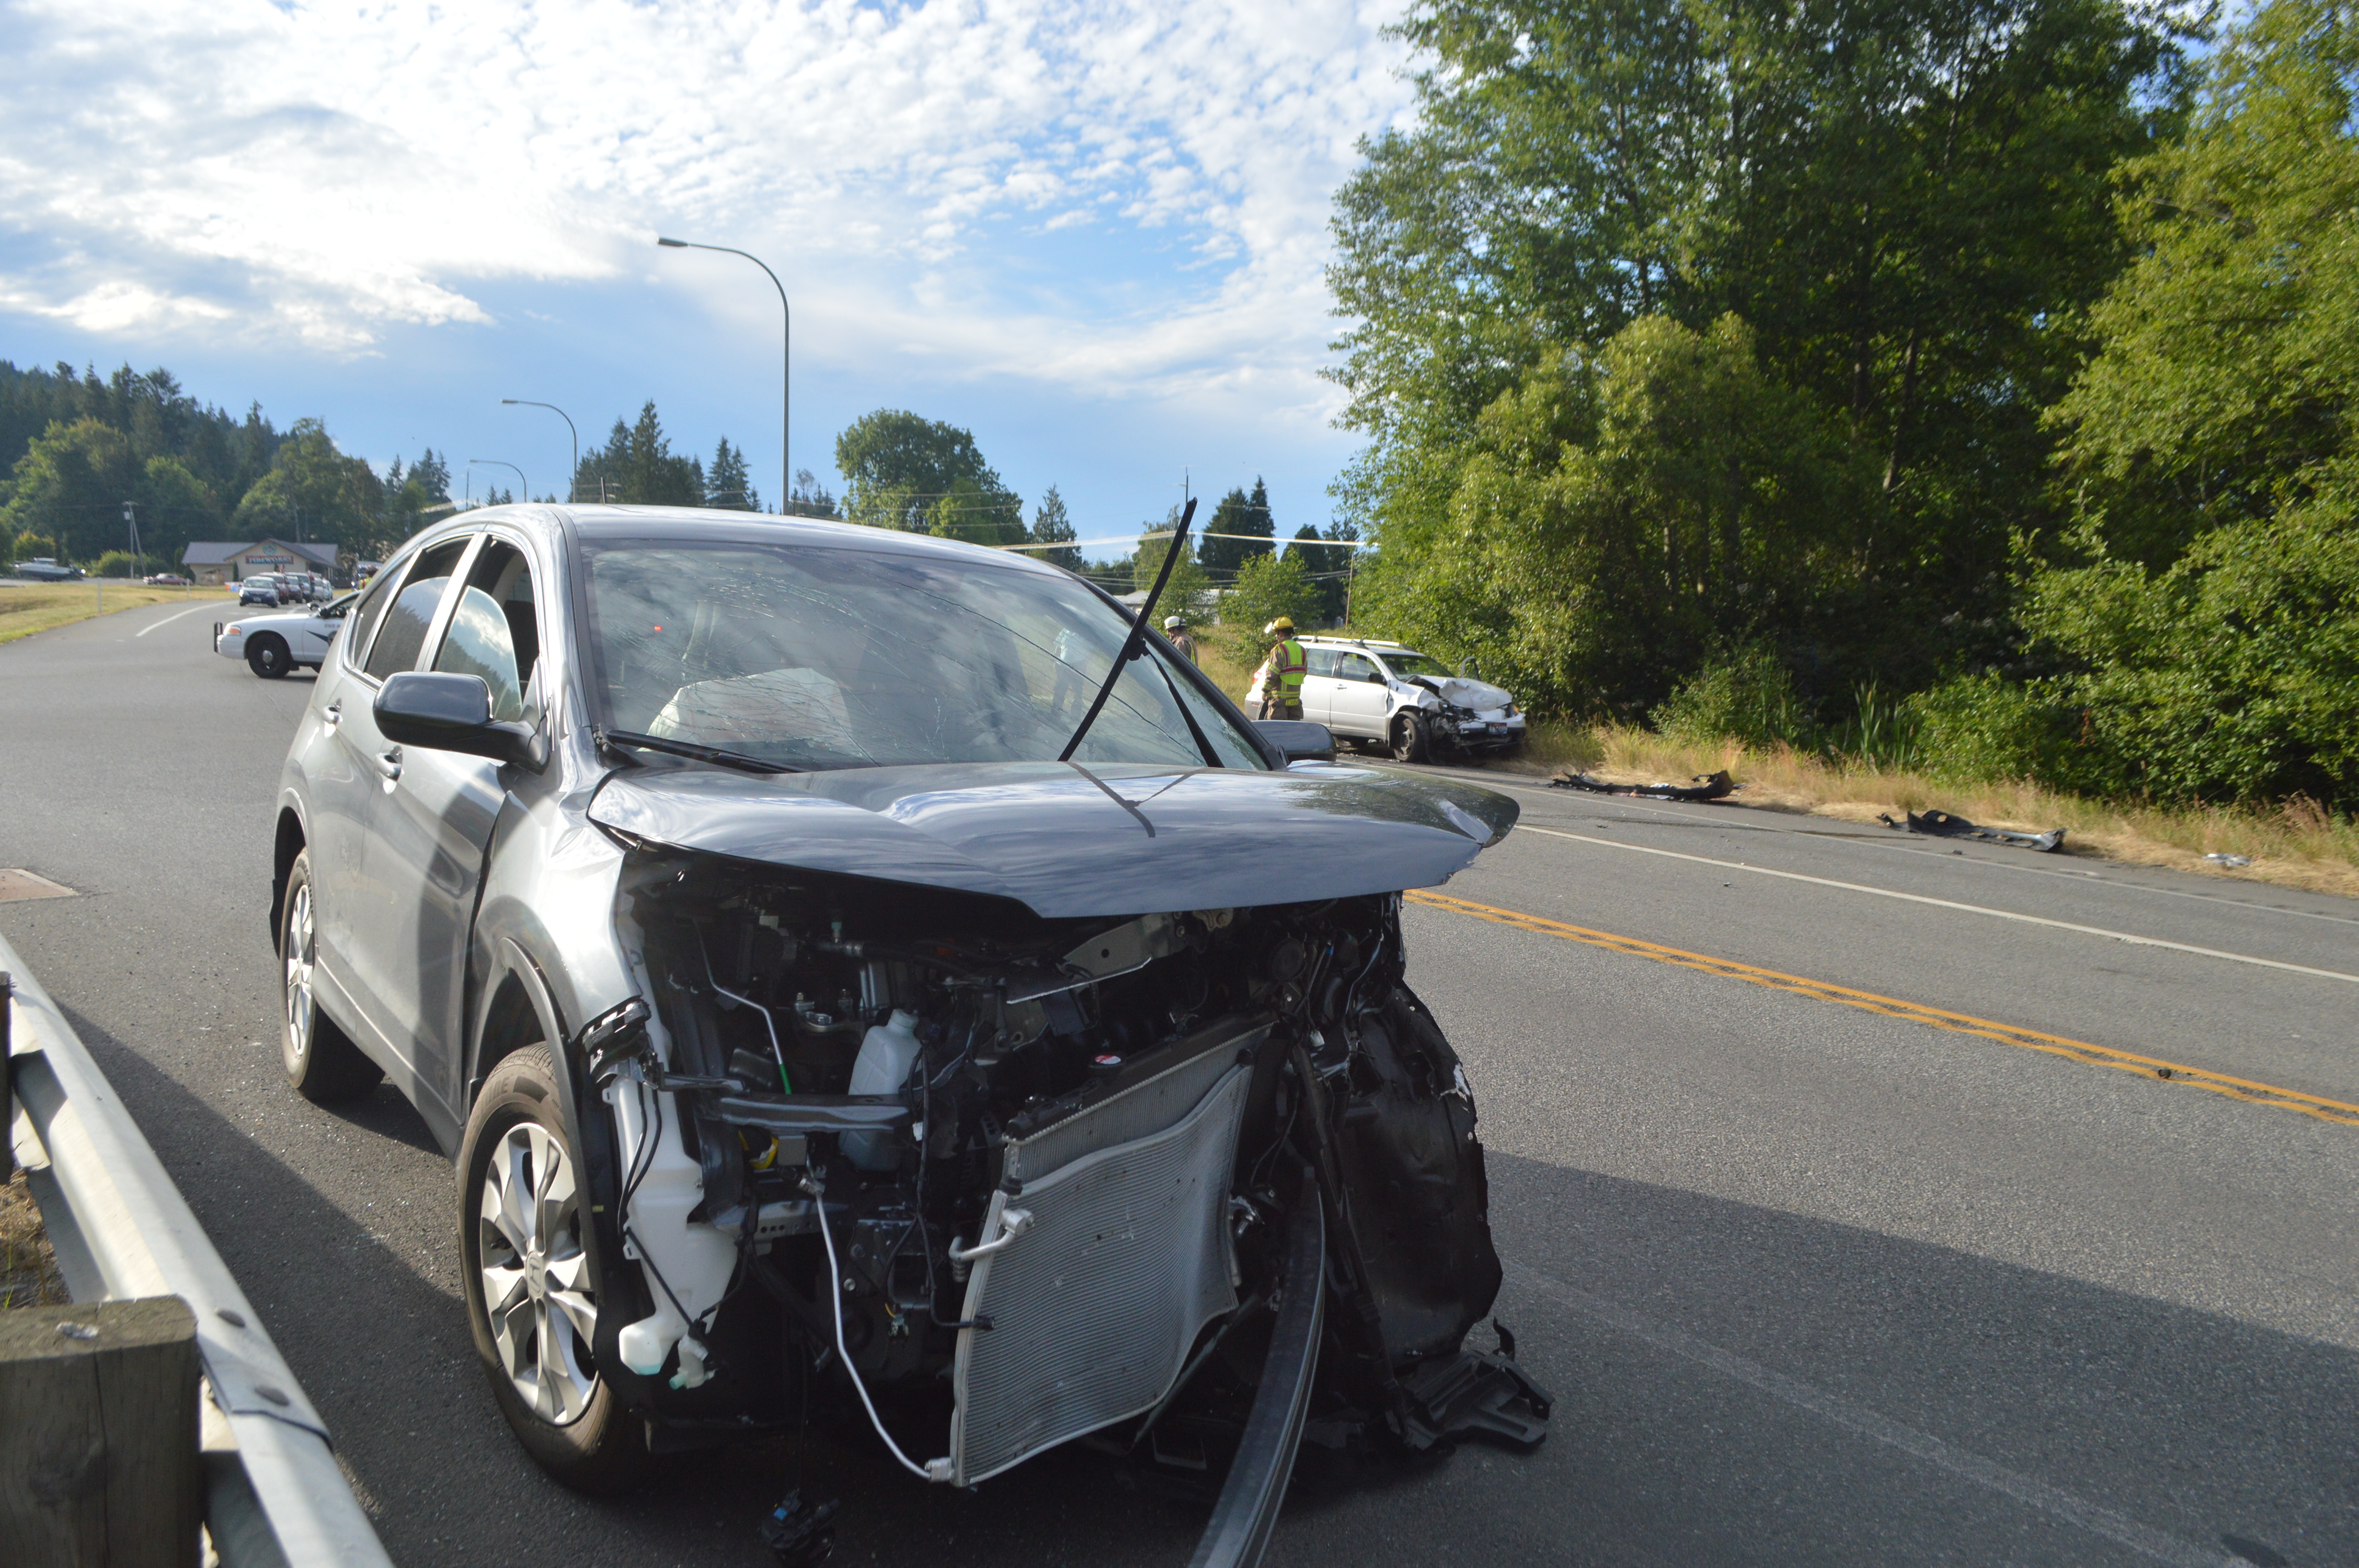 The scene of the wreck on U.S. Highway 101 at 7 Cedars Casino in Blyn. Joe Smillie/Peninsula Daily News